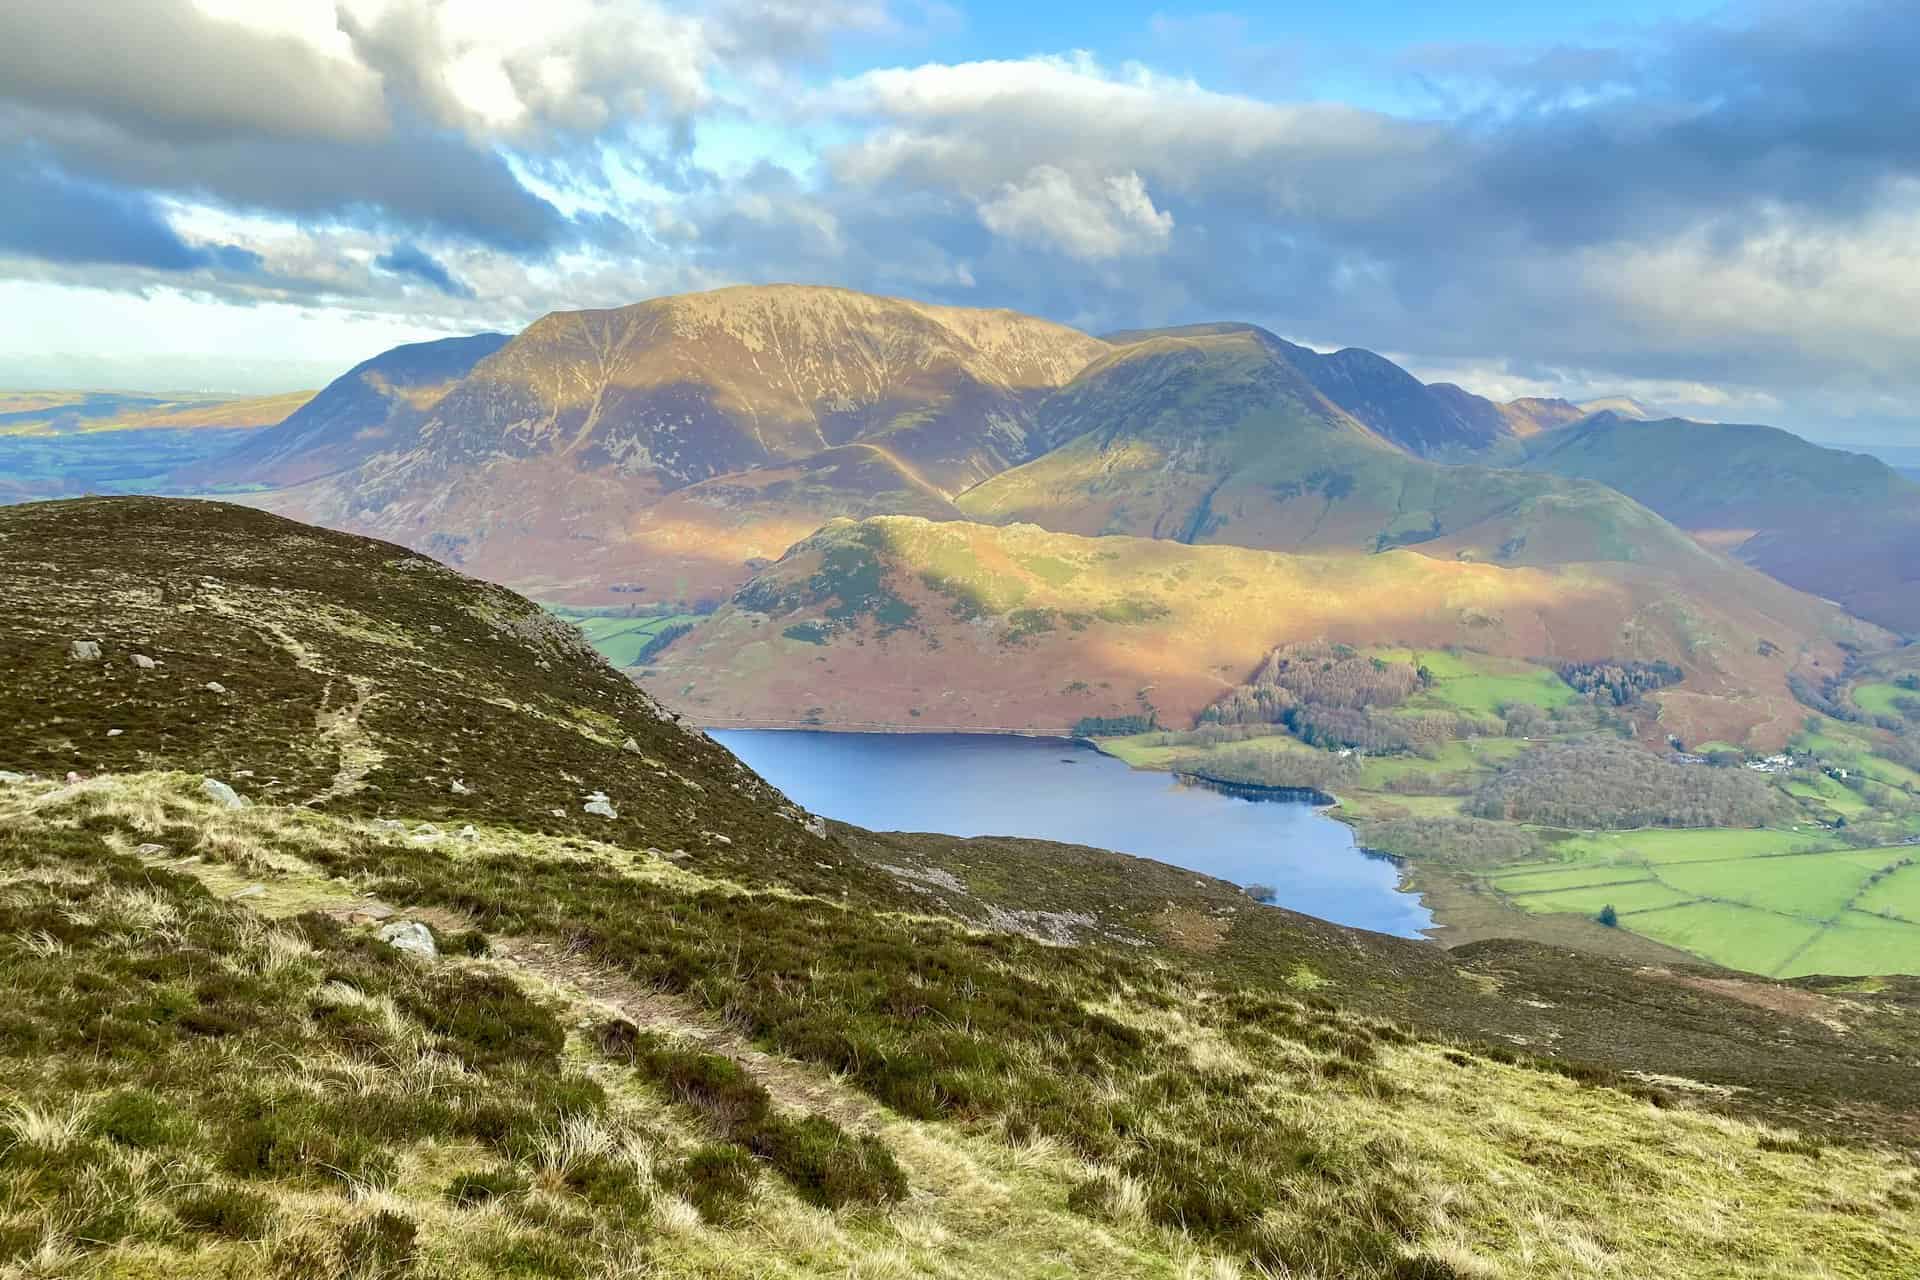 Amazing views from Lingcomb Edge: Crummock Water backed by Rannerdale Knotts, Grasmoor and Whiteless Pike to name but a few.